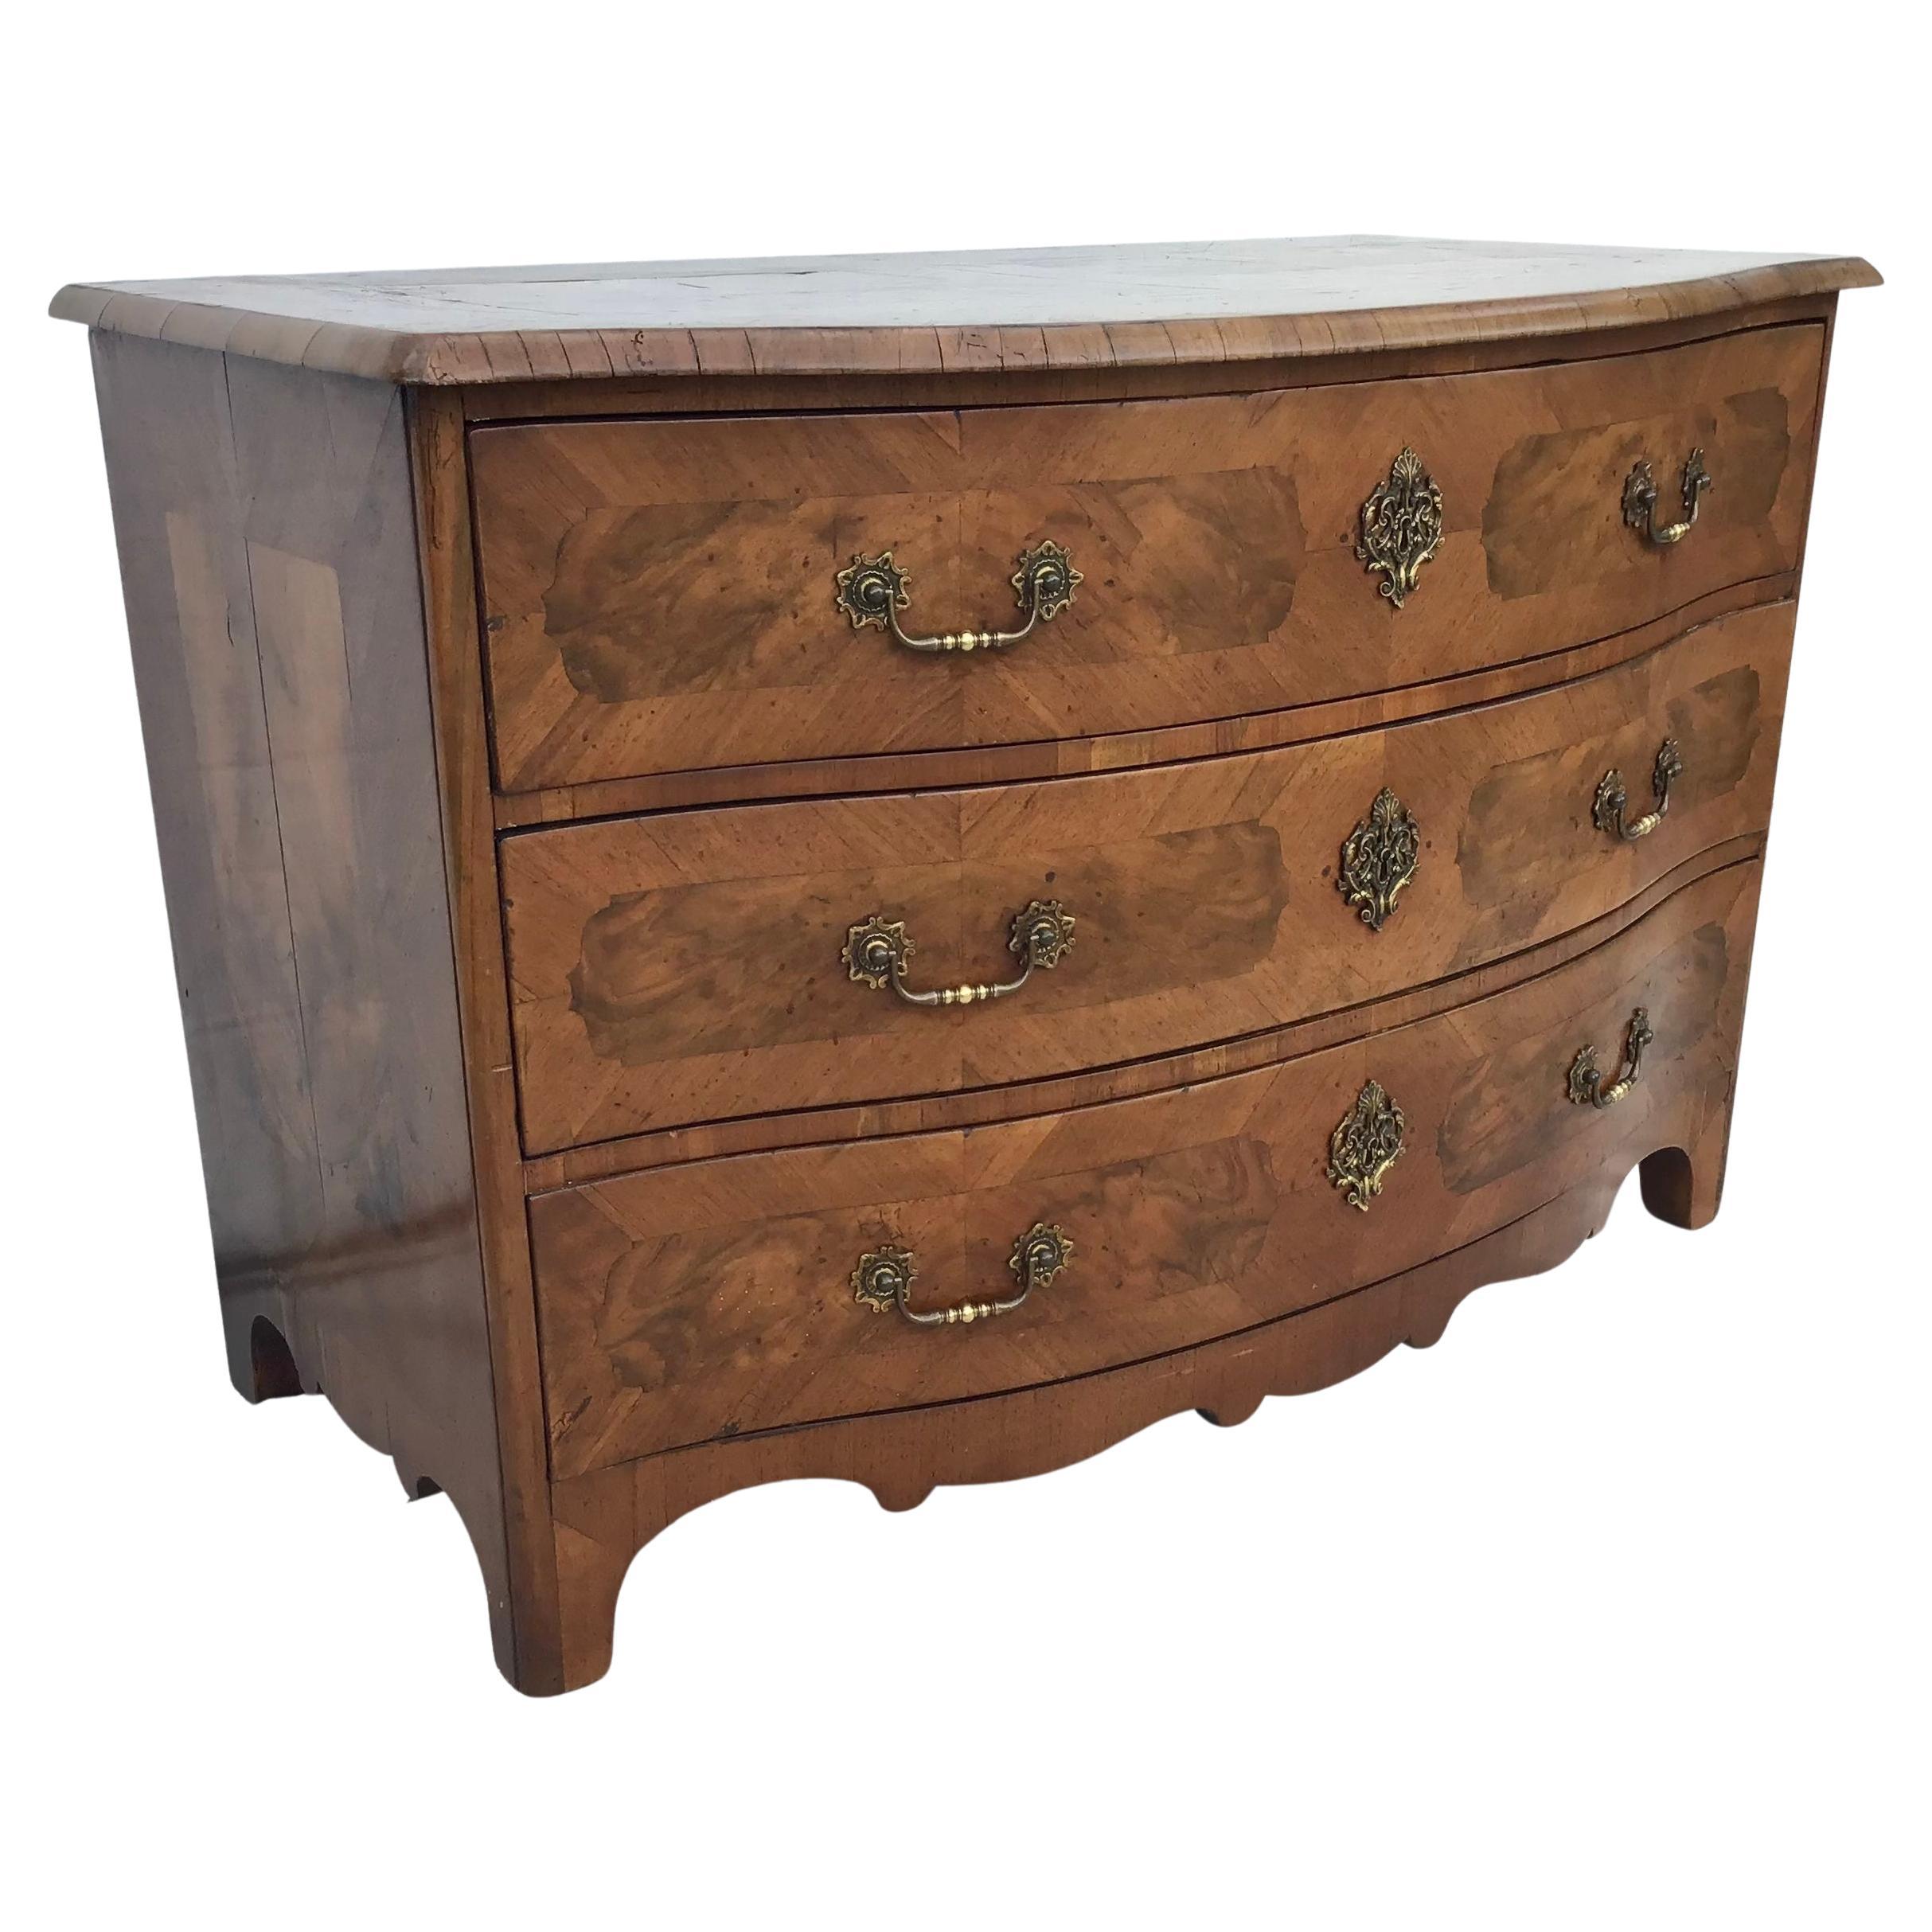 18th Century German Baroque Commode or chest of drawers with curved top front edge, three stacked dovetailed drawers with brass pulls, serpentine front and top, supported on block feet. Inlaid sides, top and drawers. Brass hardware and original iron